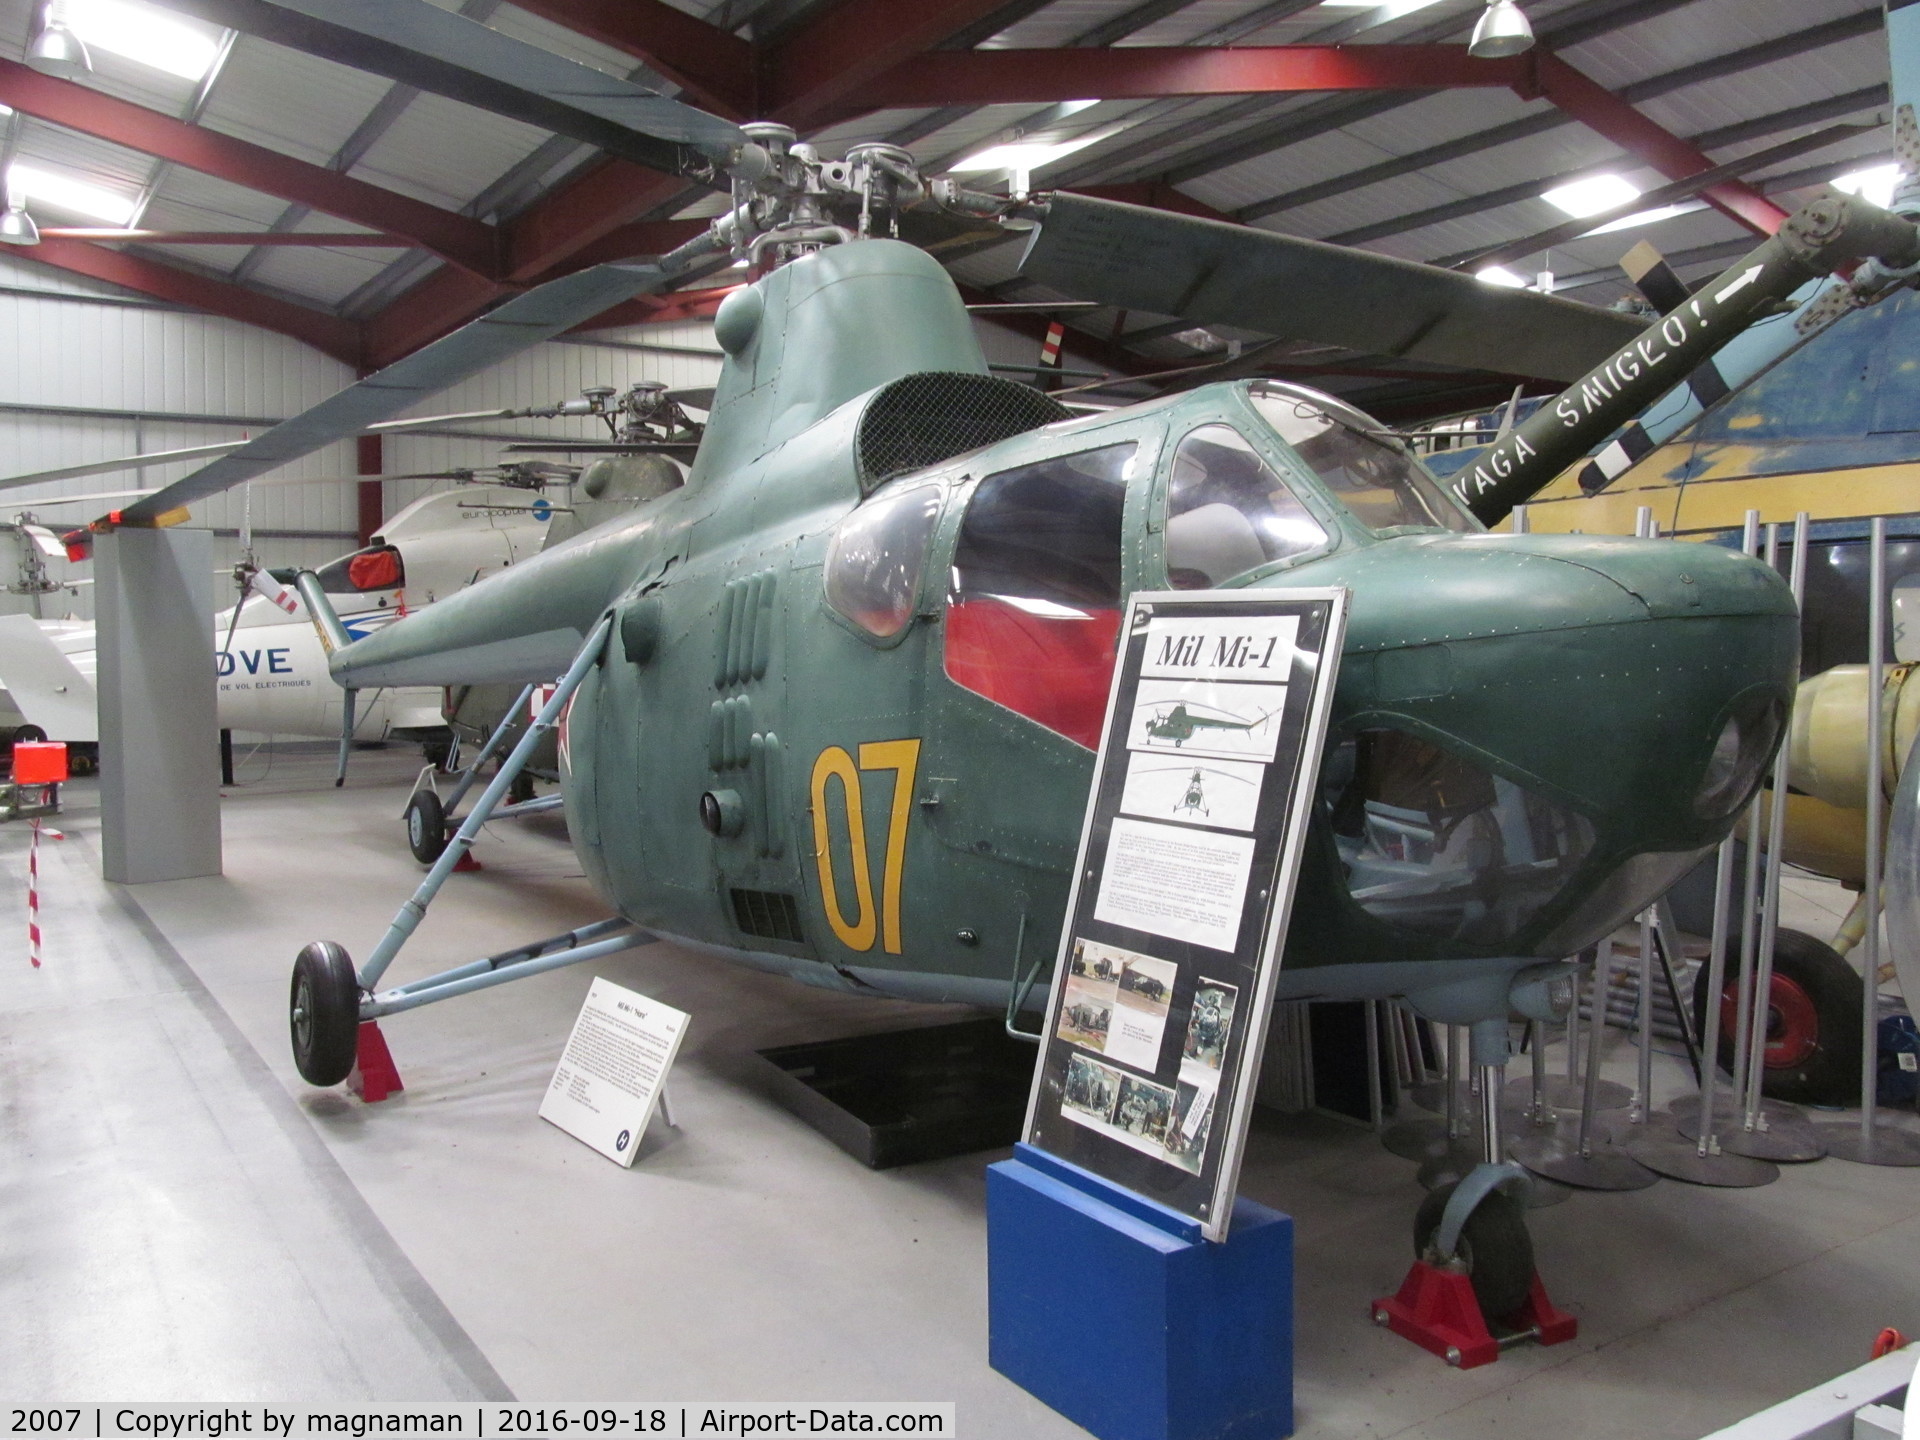 2007, Mil Mi-1 C/N S112007, nice eastern Europe contingent at this museum